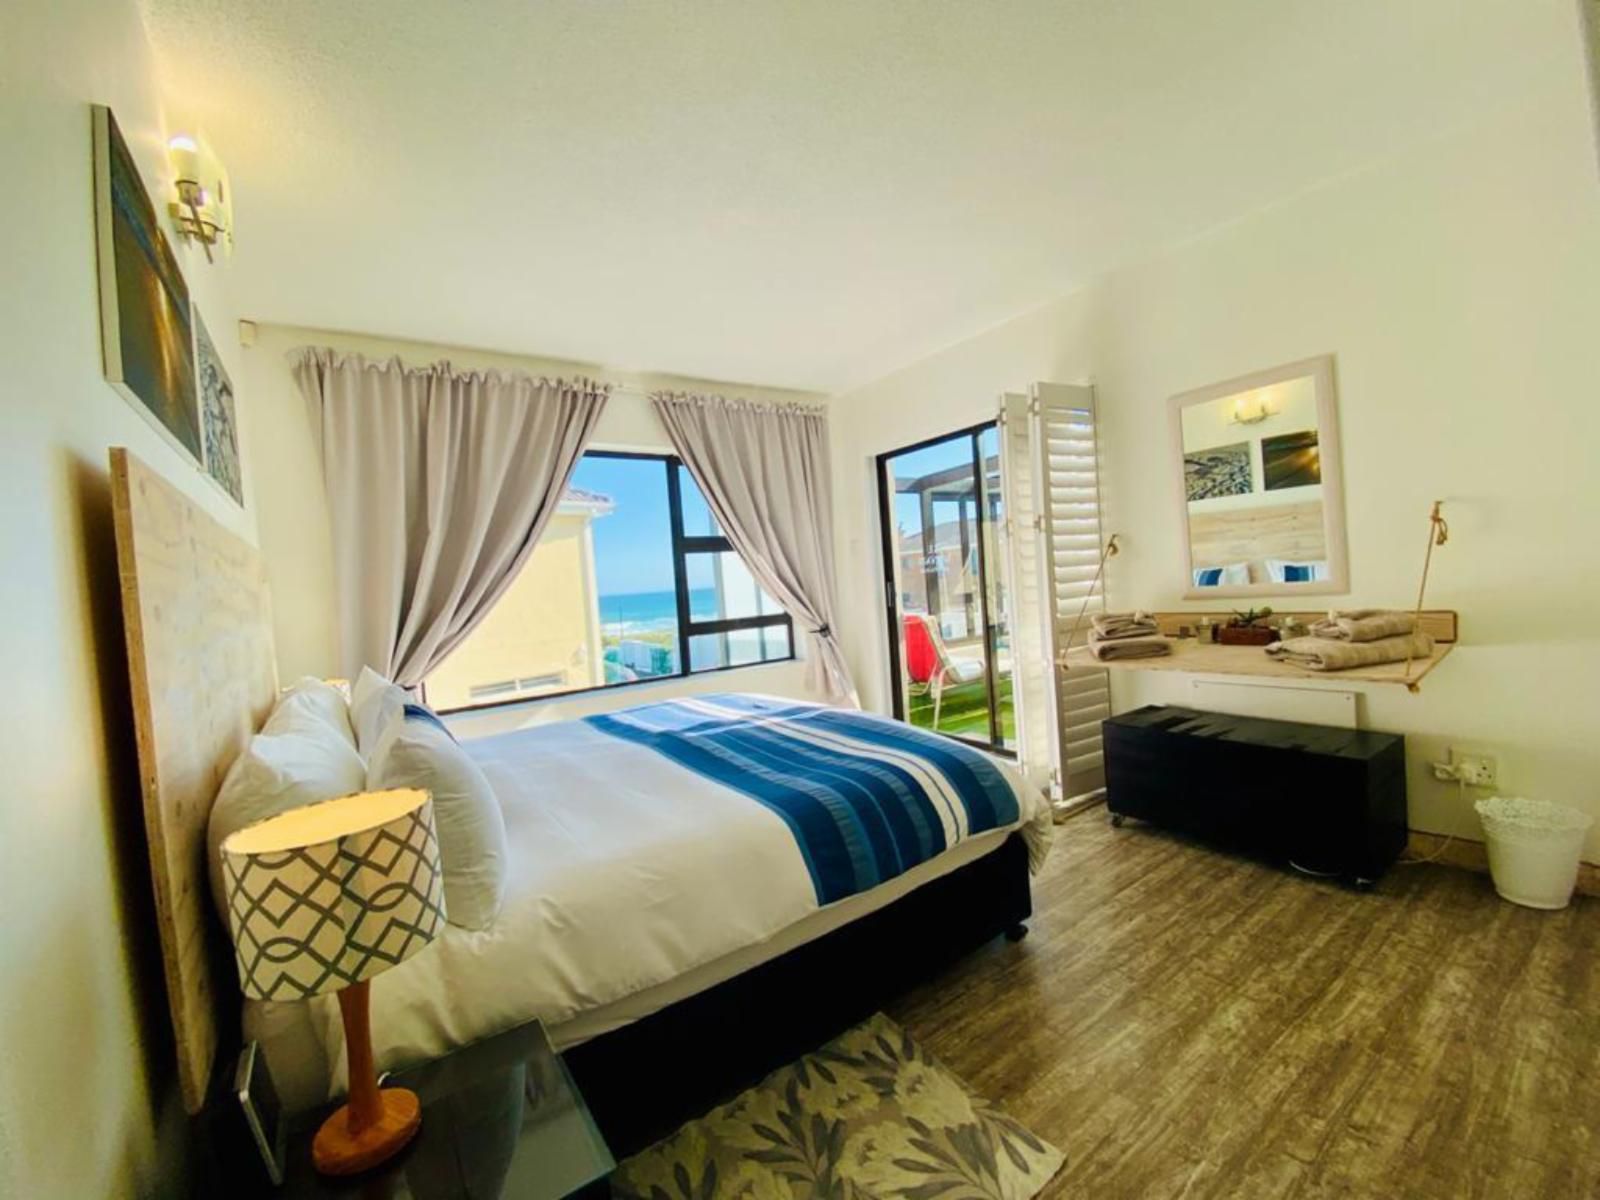 31 On Seaview Self Catering Yzerfontein Yzerfontein Western Cape South Africa Bedroom